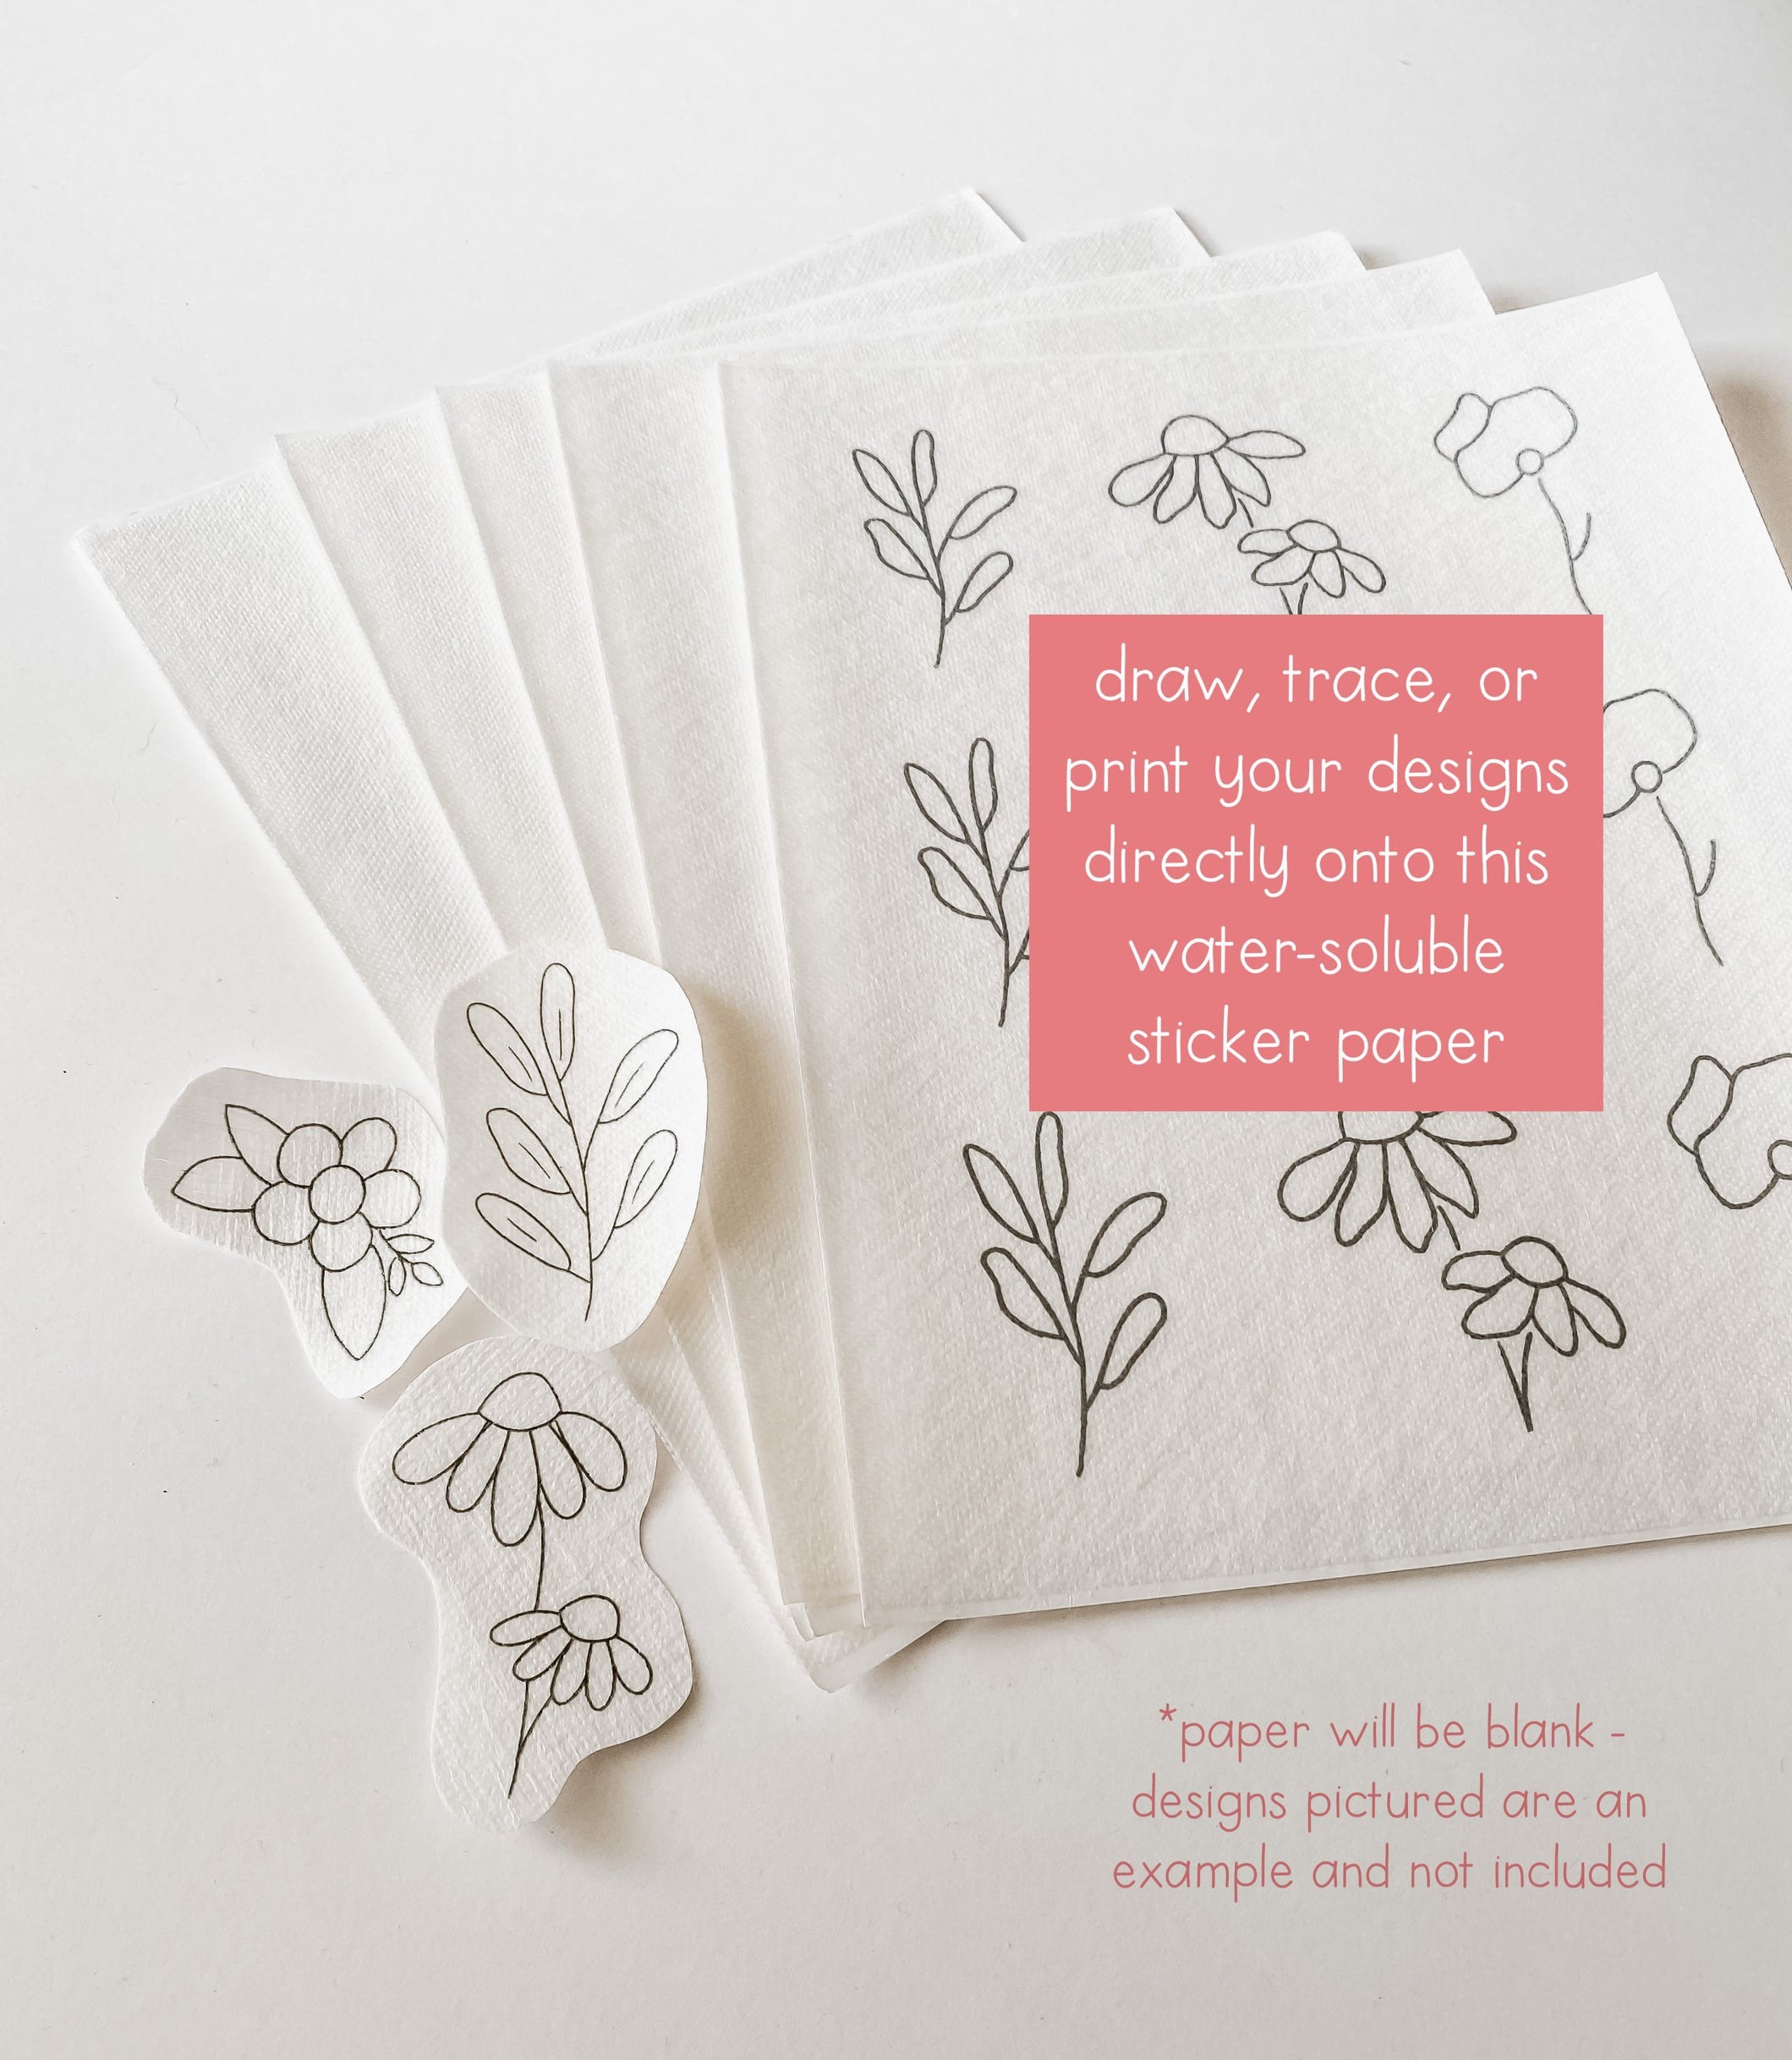 Water-Soluble Sticker Paper – threadunraveled